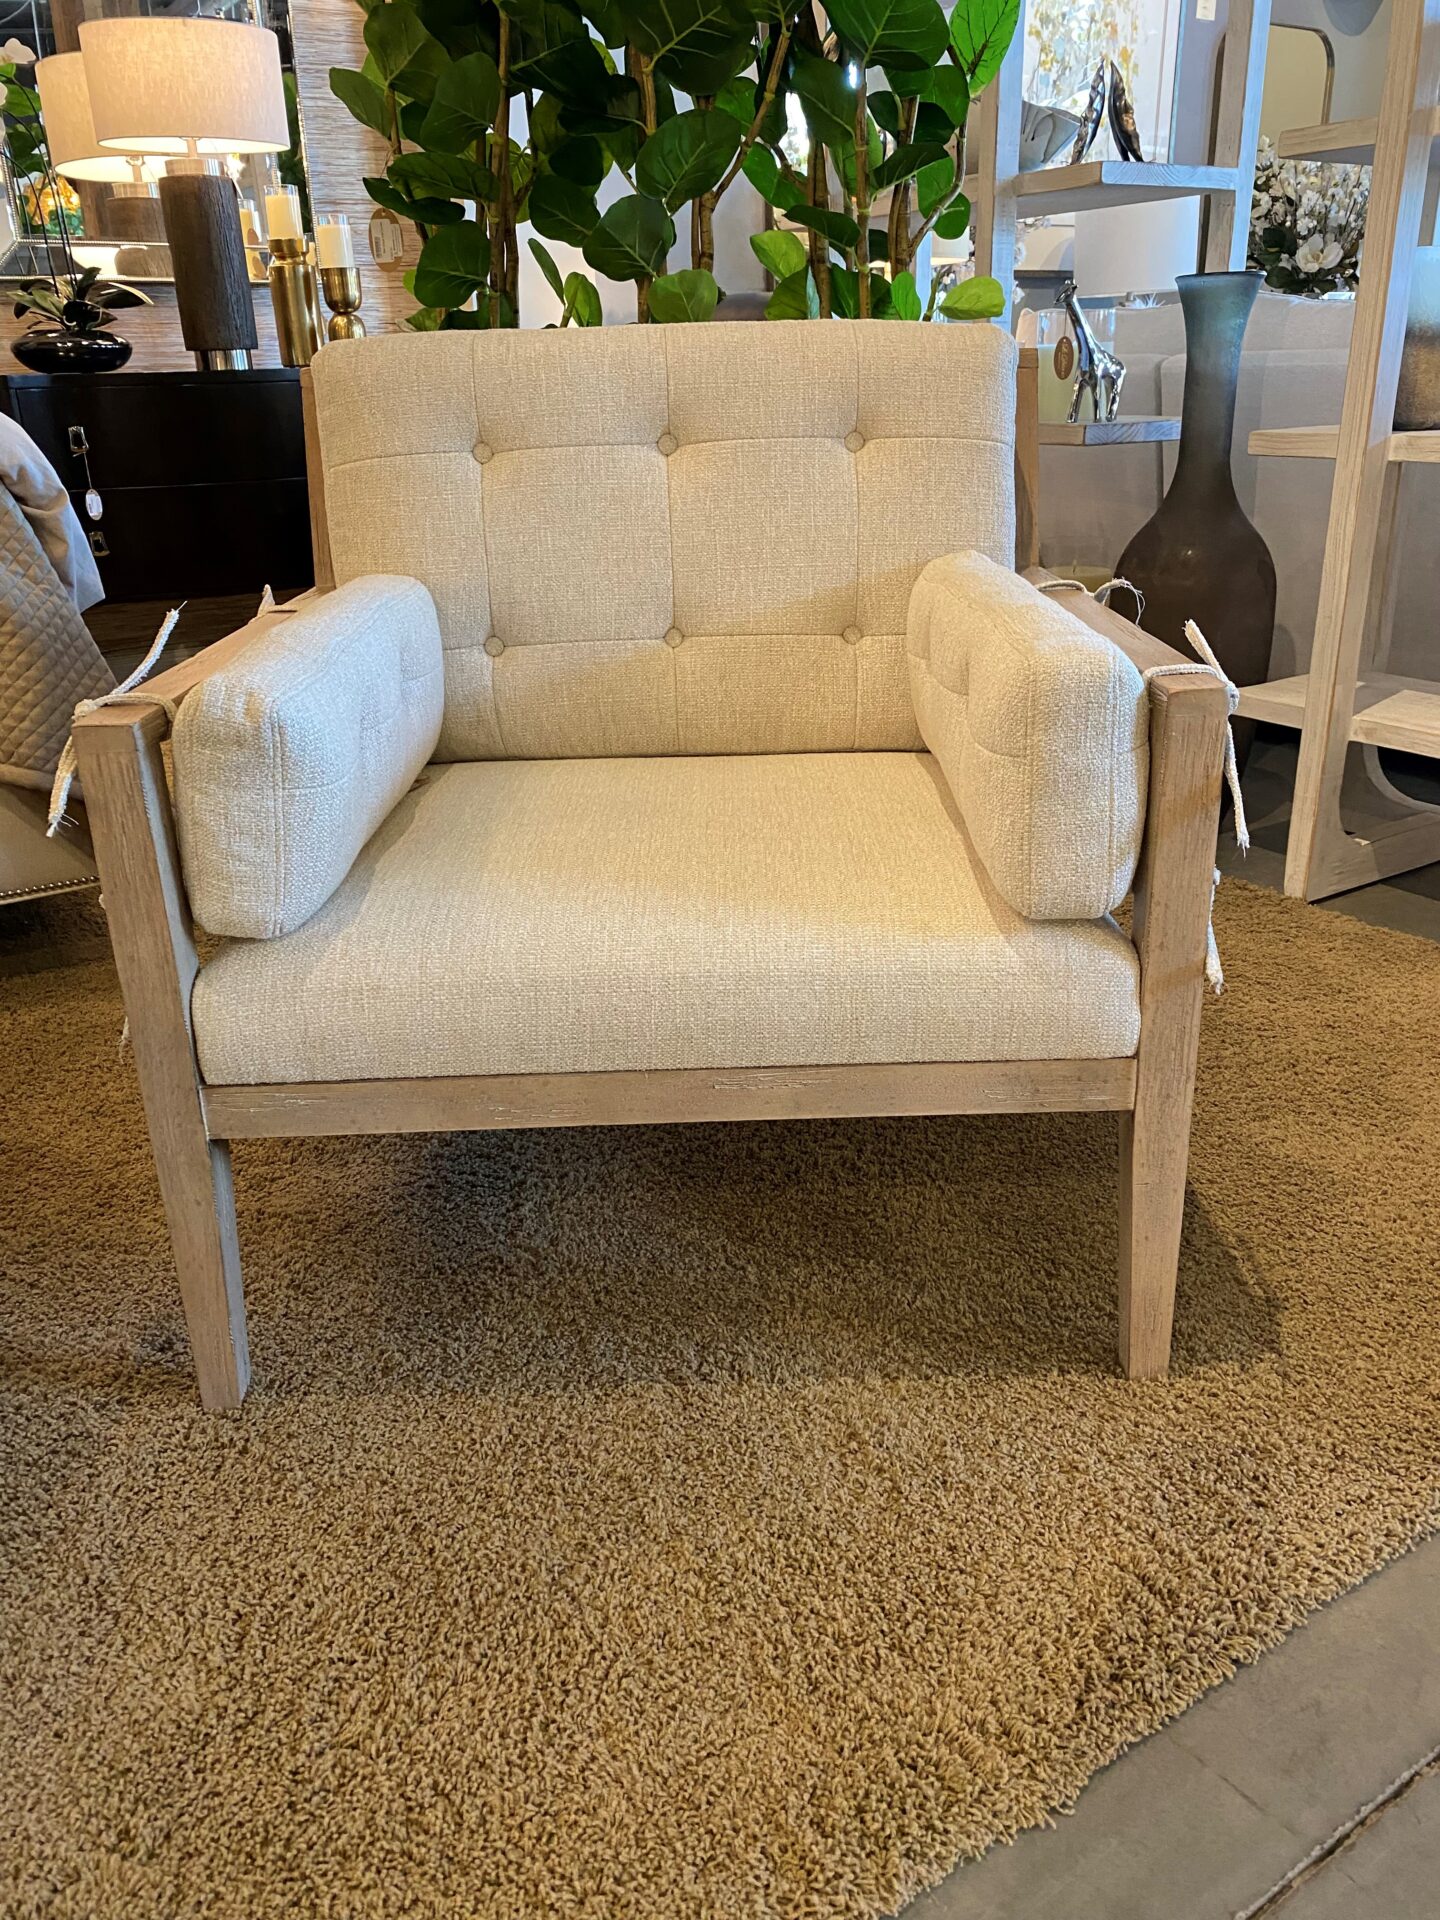 A white chair with a beige cushion on the back.